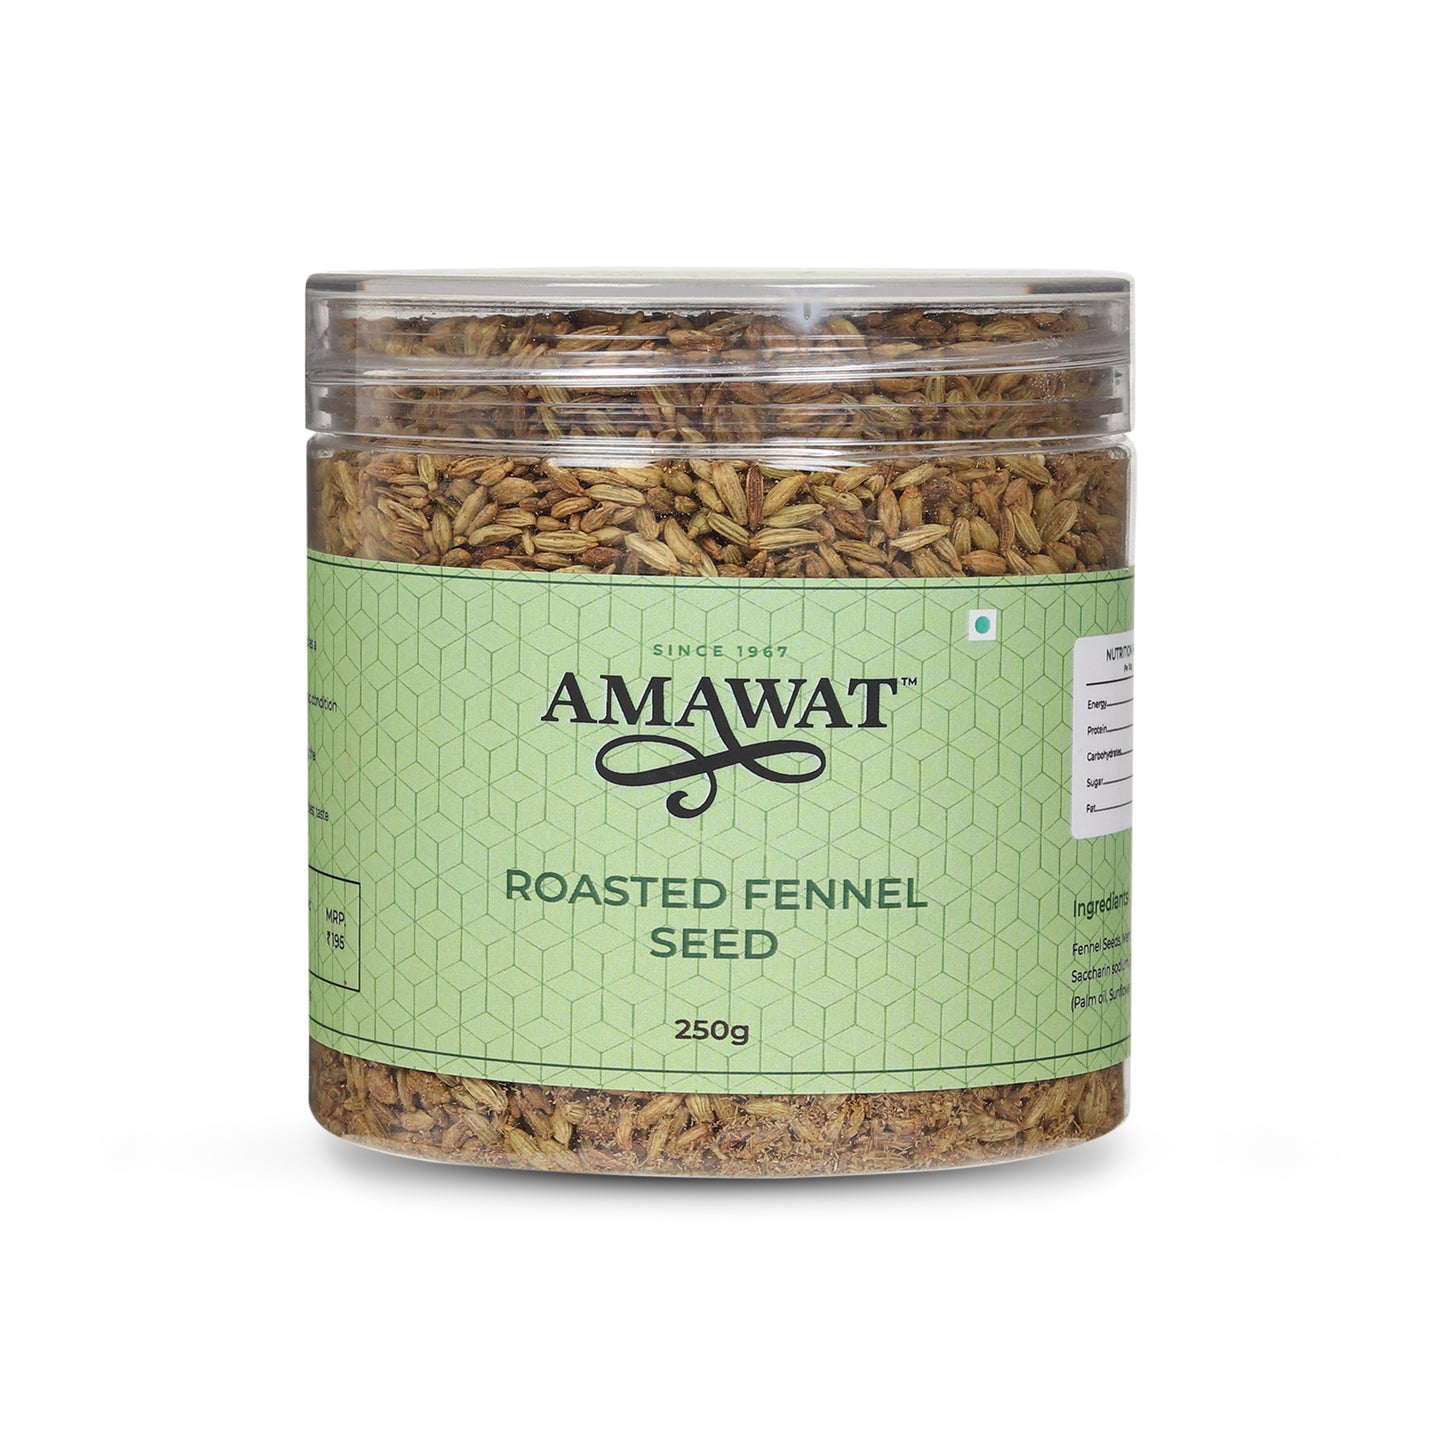 Buy roasted fennel seed From amawat